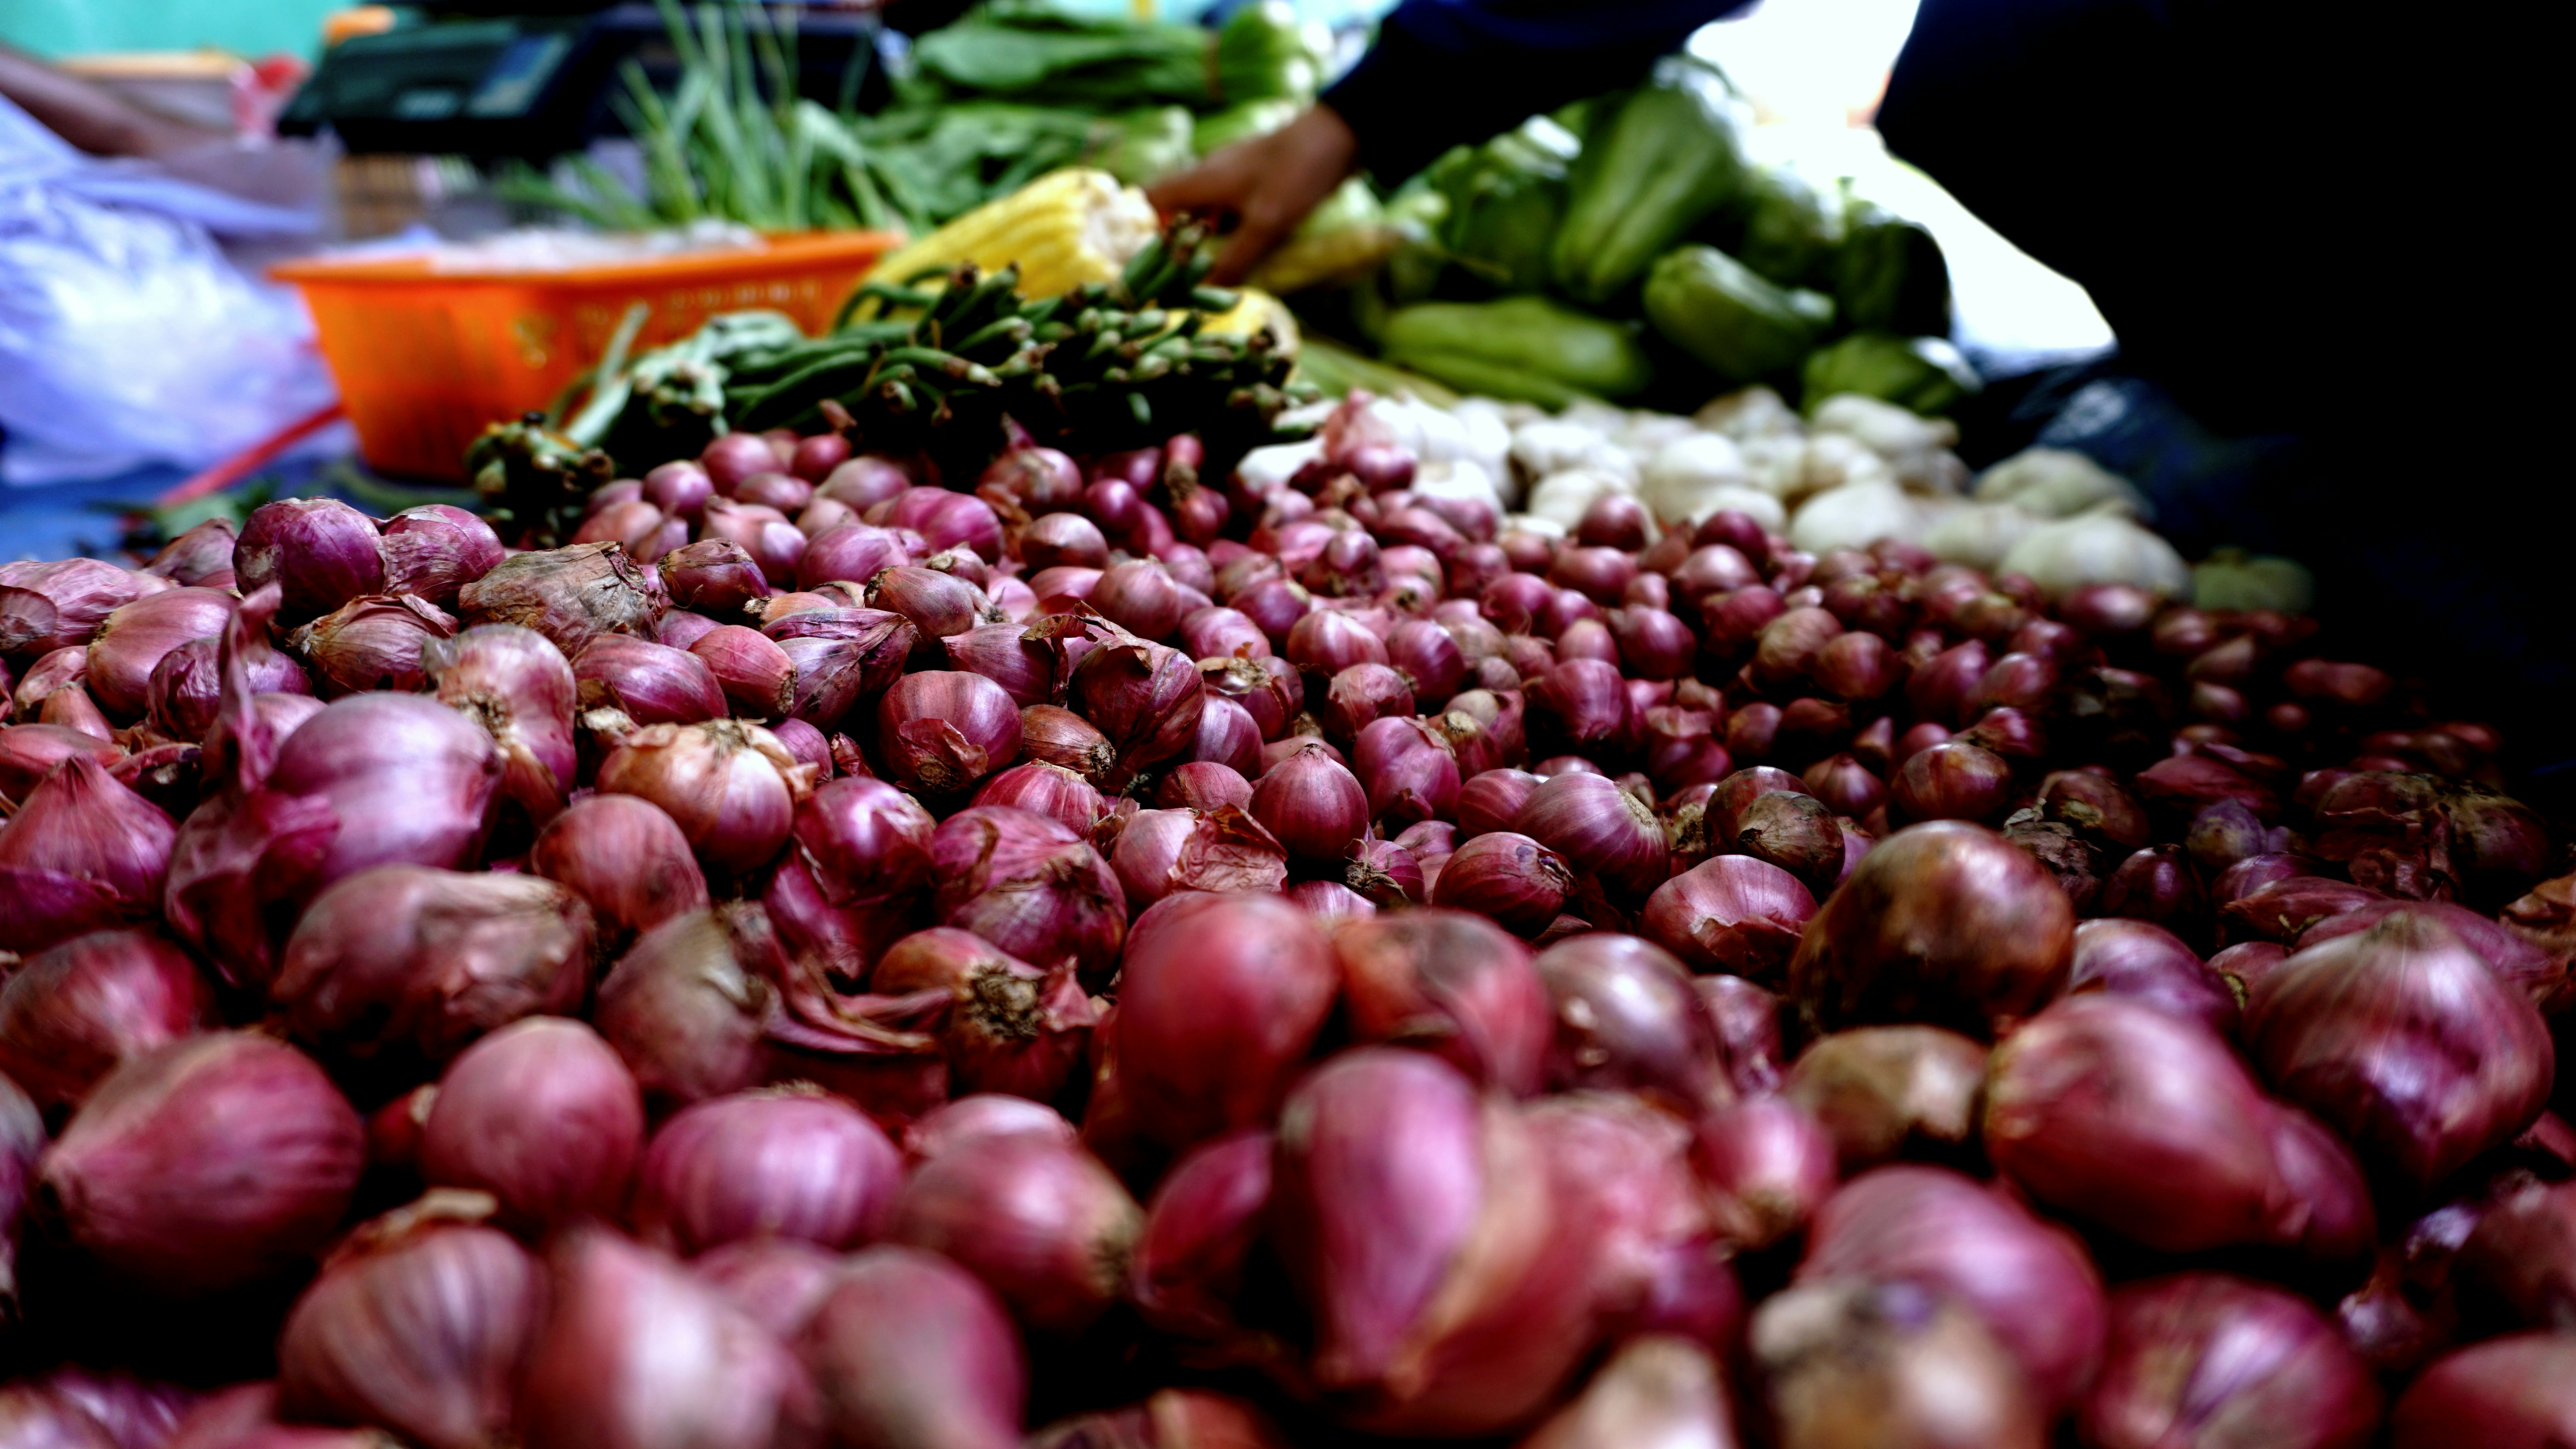 Onions selled in Traditional Market